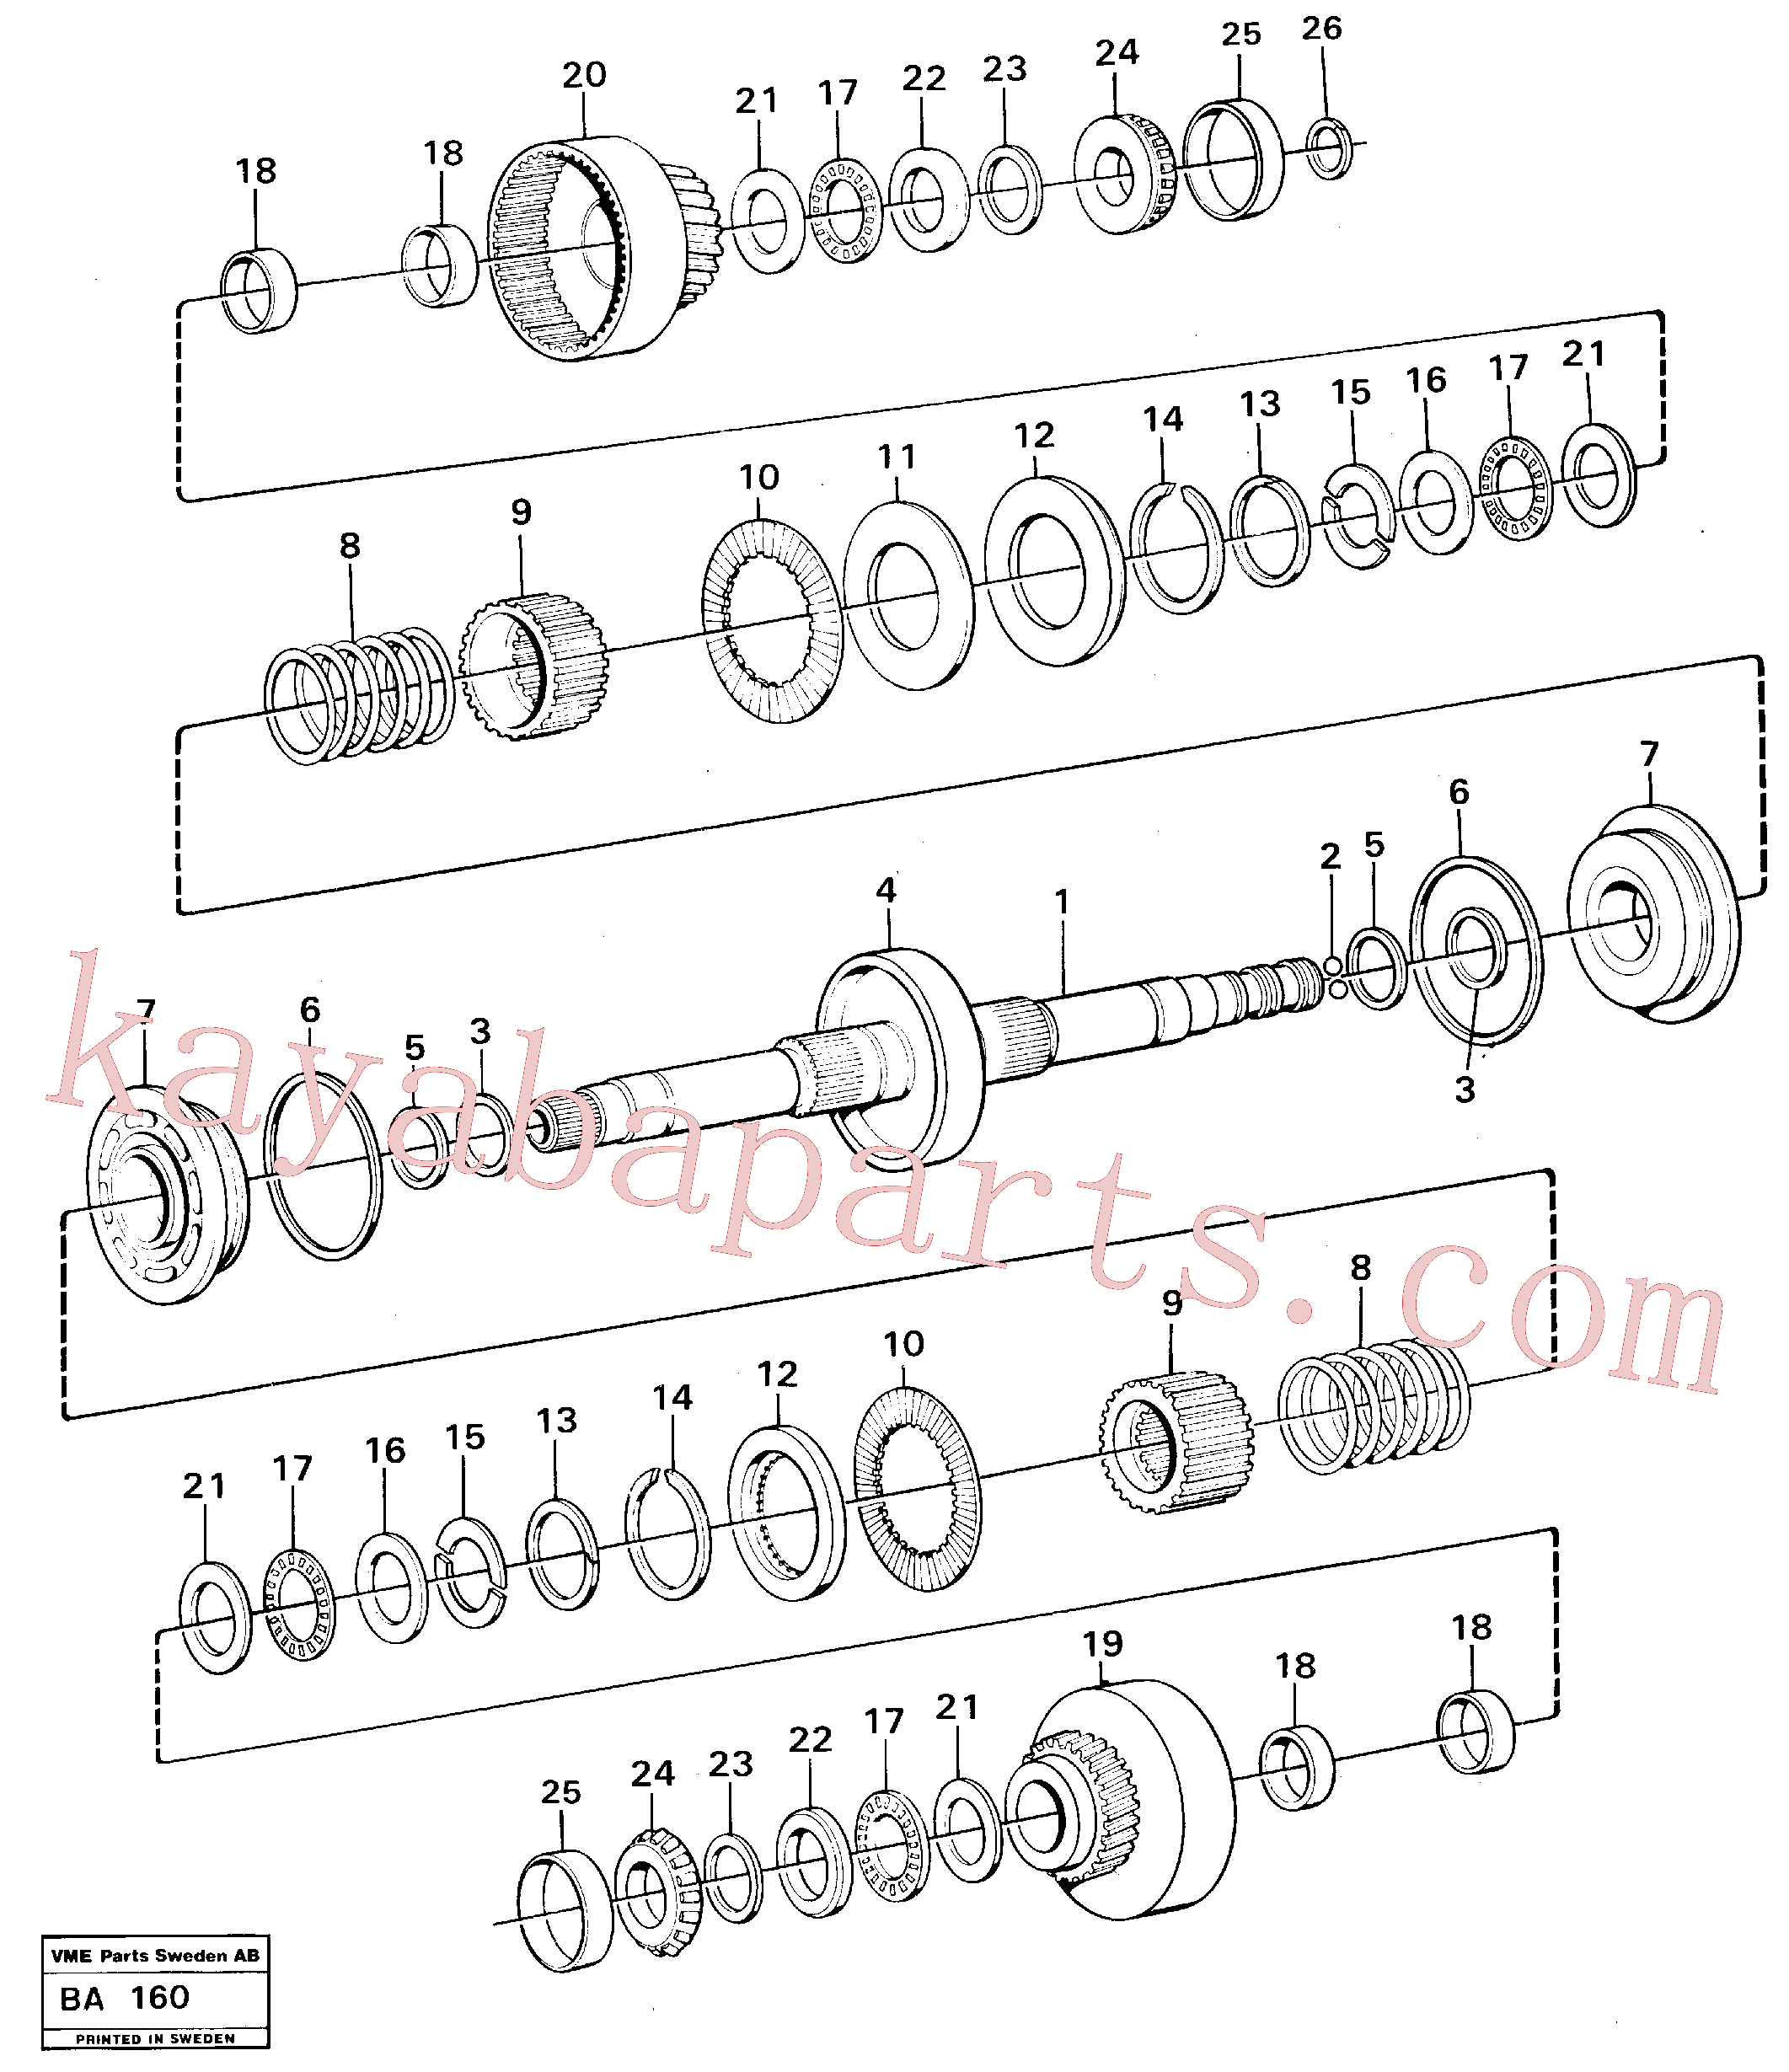 VOE4786536 for Volvo Clutches forward and reverse(BA160 assembly)